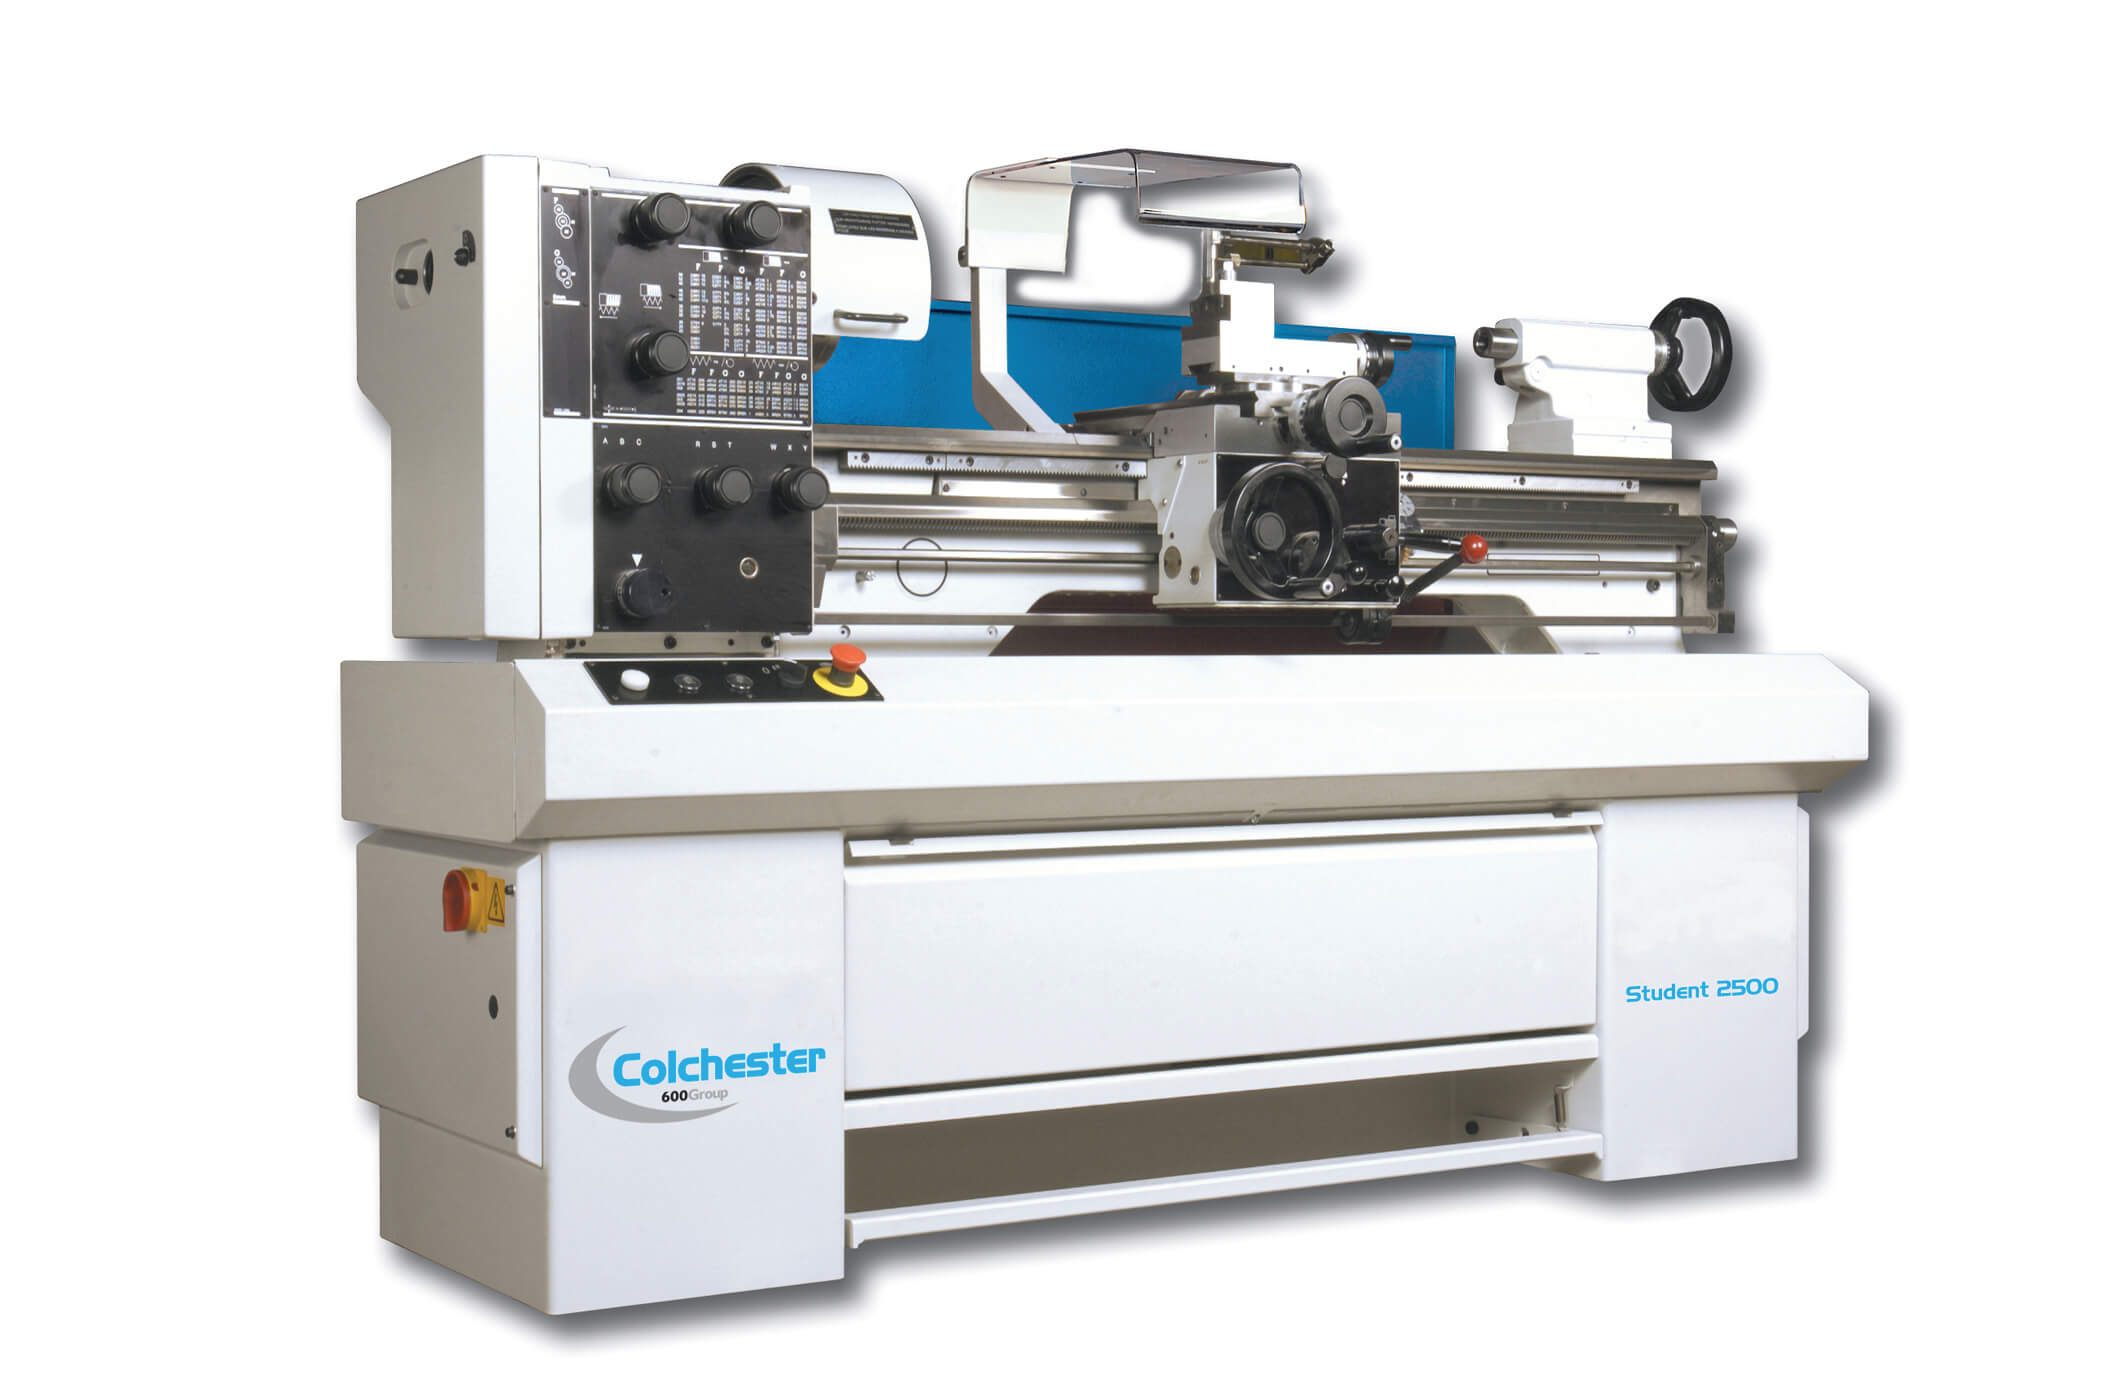 Colchester Student 2500 Engineering Lathe - 635mm bed - Three Phase